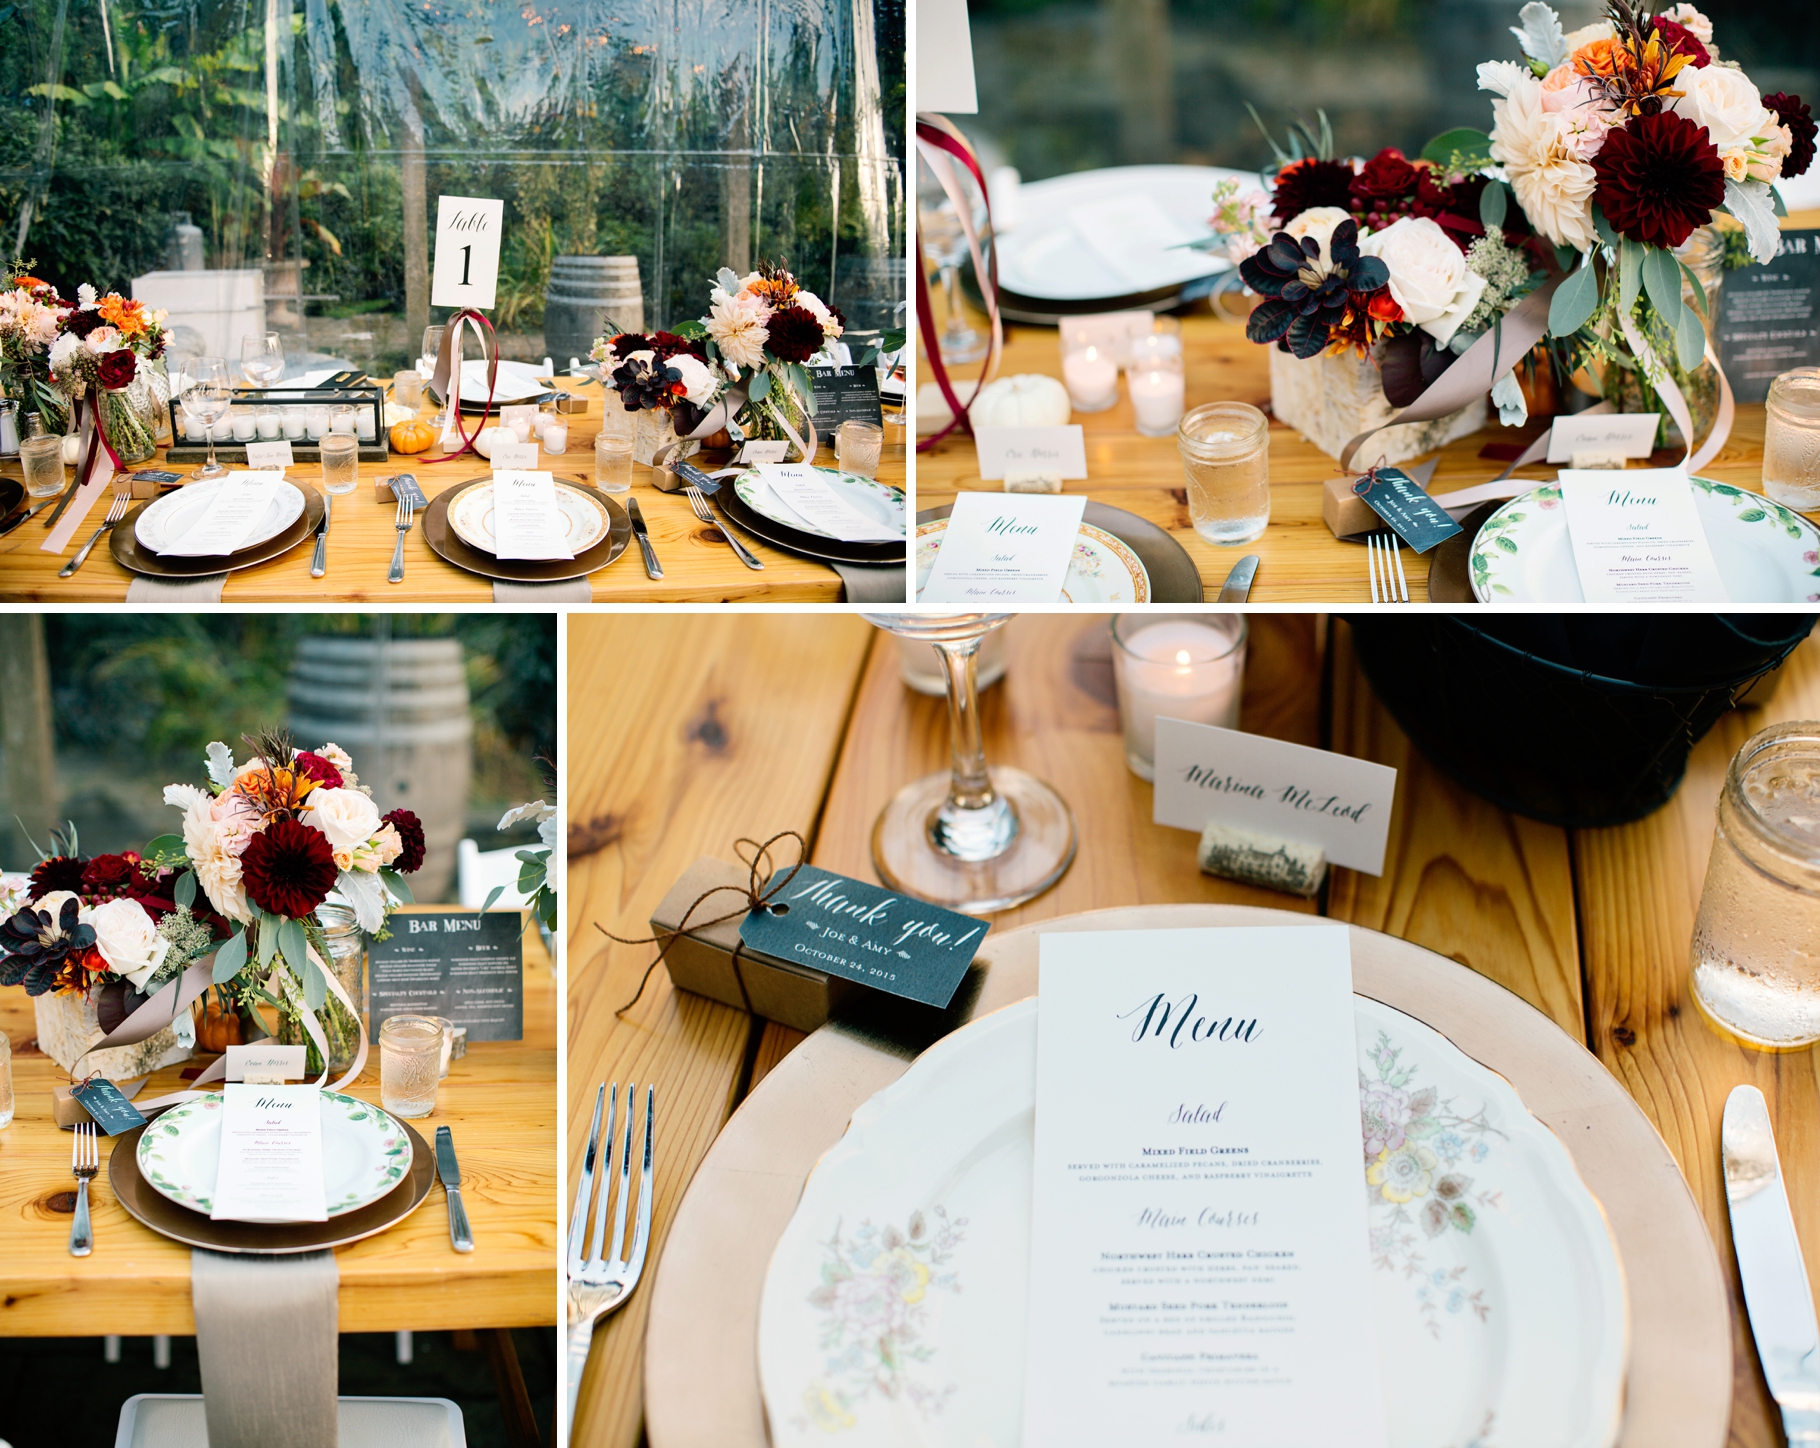 35-Reception-China-Plate-Settings-Farm-Tables-Delille-Cellars-Chateau-Vineyard-Woodinville-Wedding-Photographer-Photography-by-Betty-Elaine